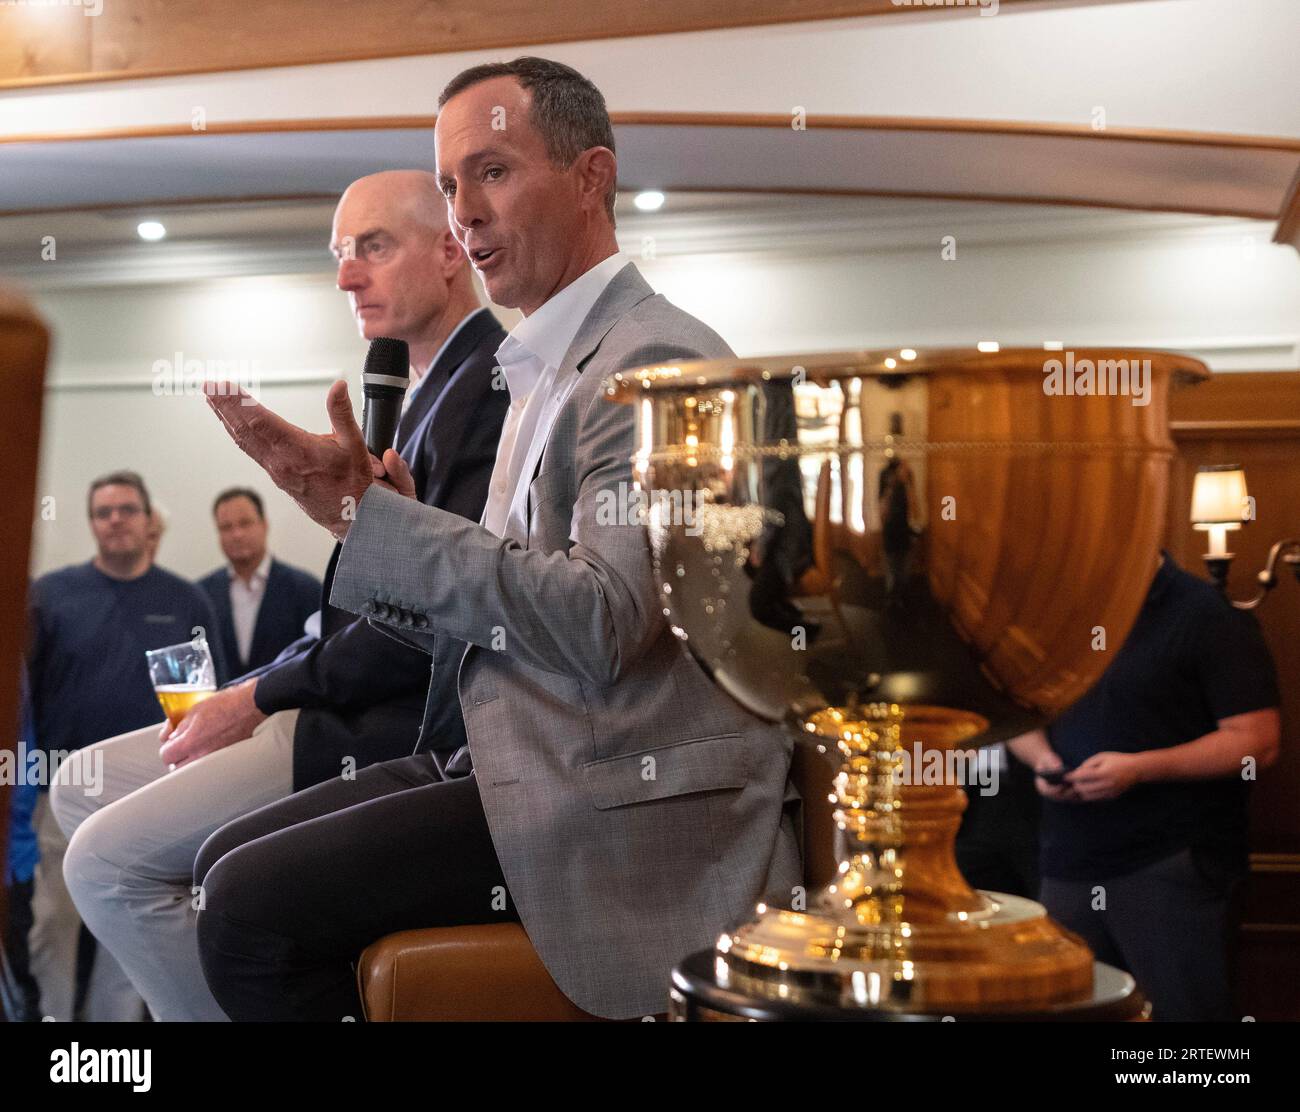 Presidents Cup Captains Mike Weir, right, for the International Team and Jim Furyk, for the U.S